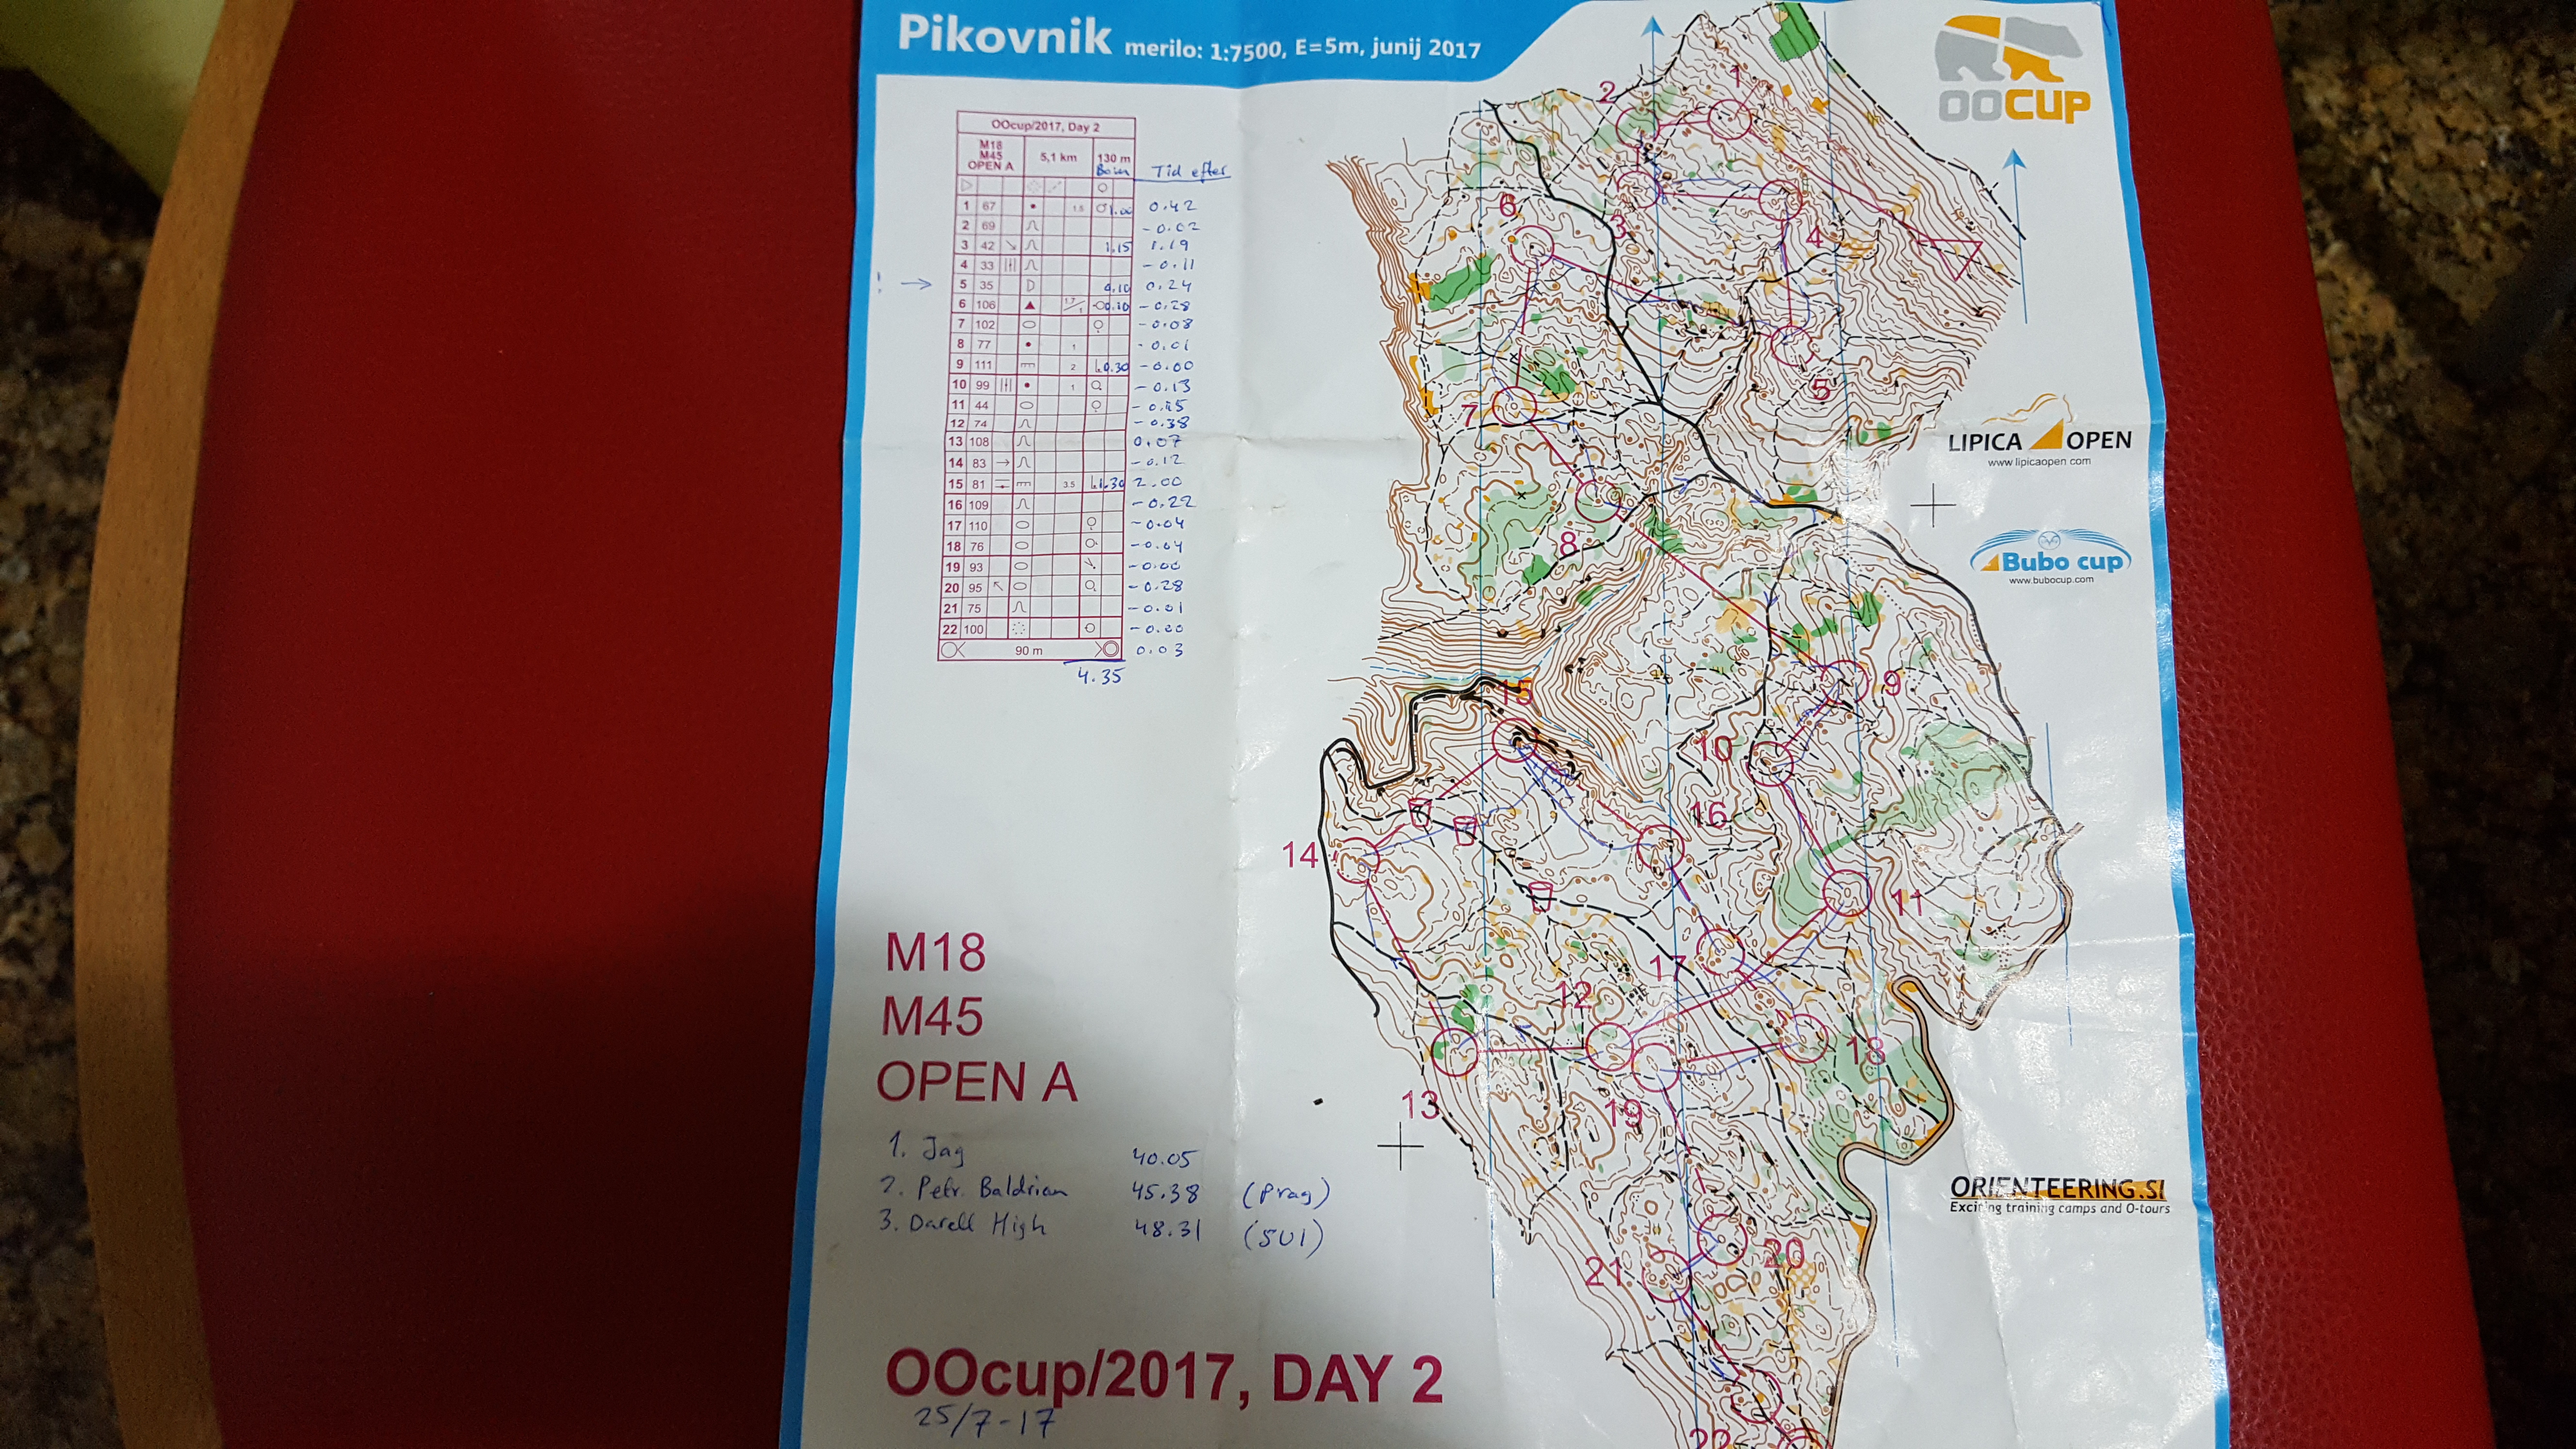 OOCUP stage2 (2017-07-25)